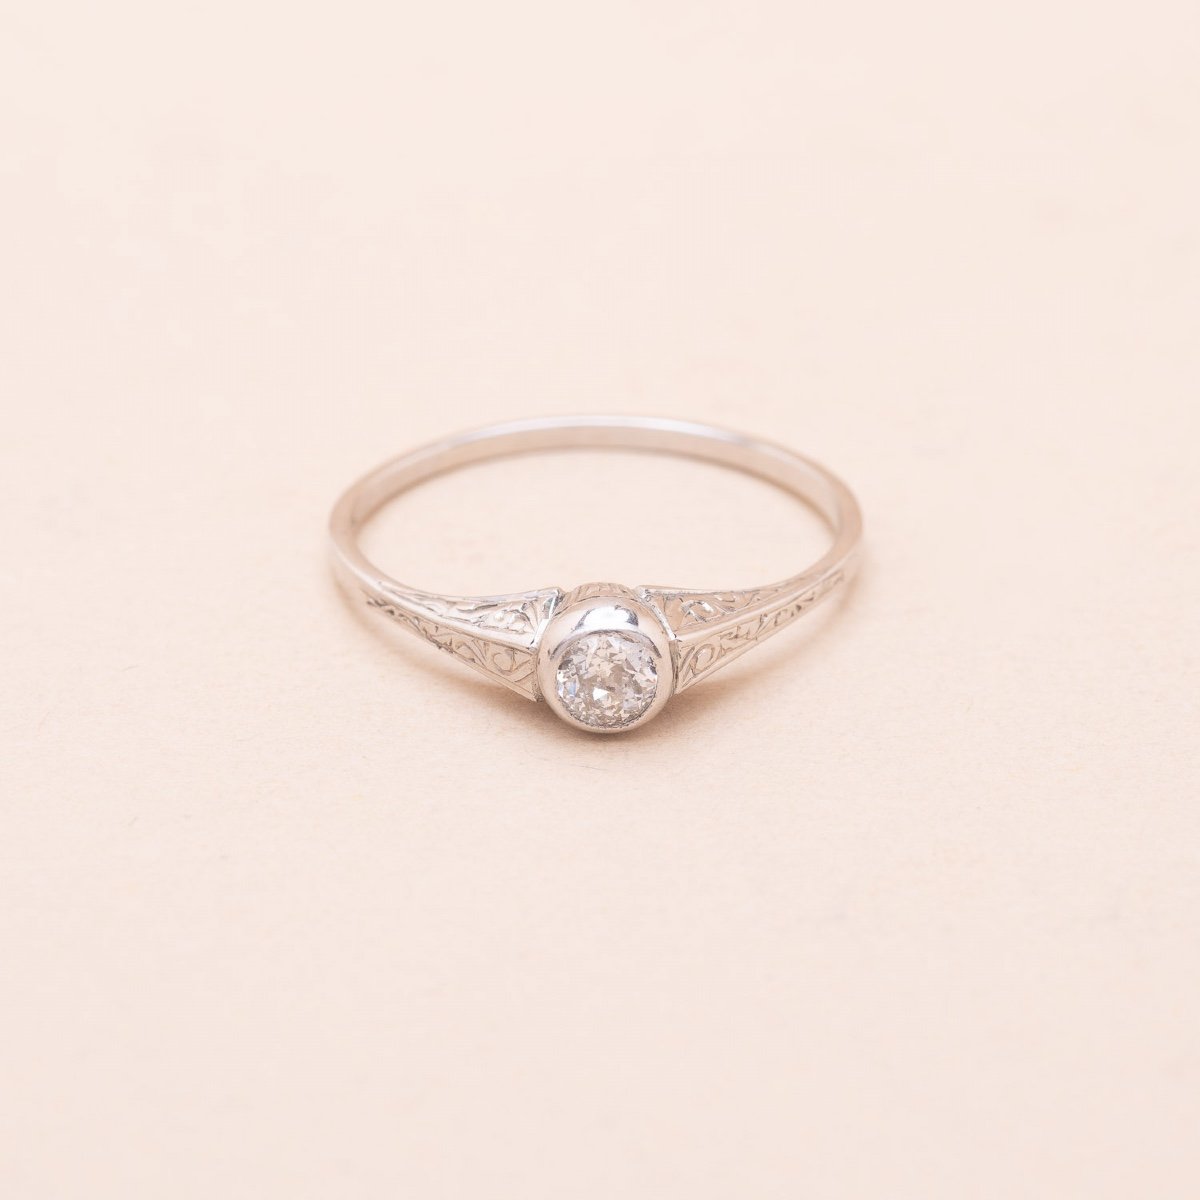 Antique Engraved Diamond Solitaire Ring